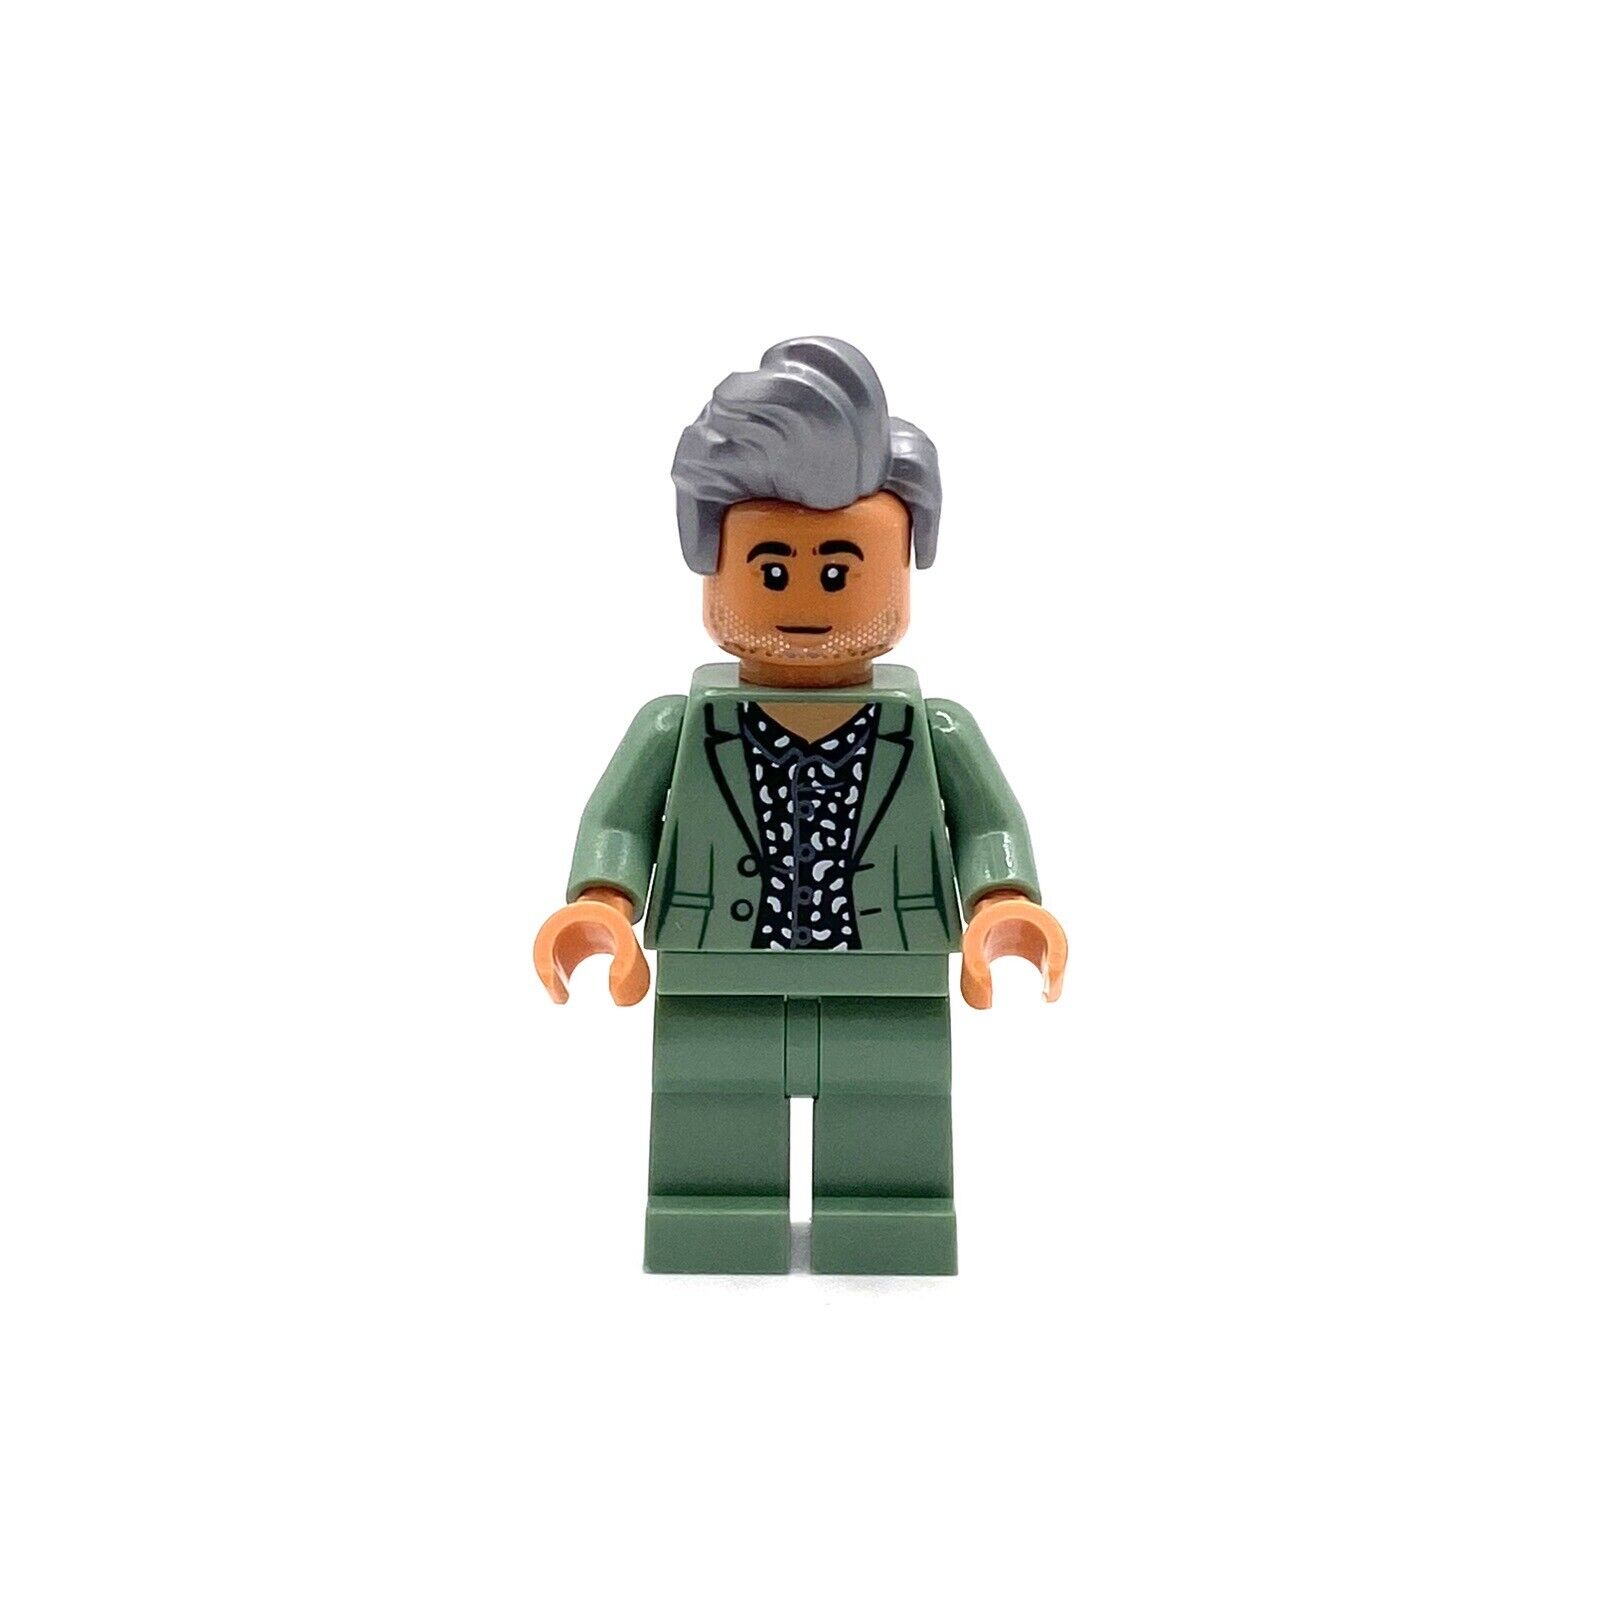 LEGO Queer Eye Minifigure - Tan France (2021) from 10291 - que001 NEW